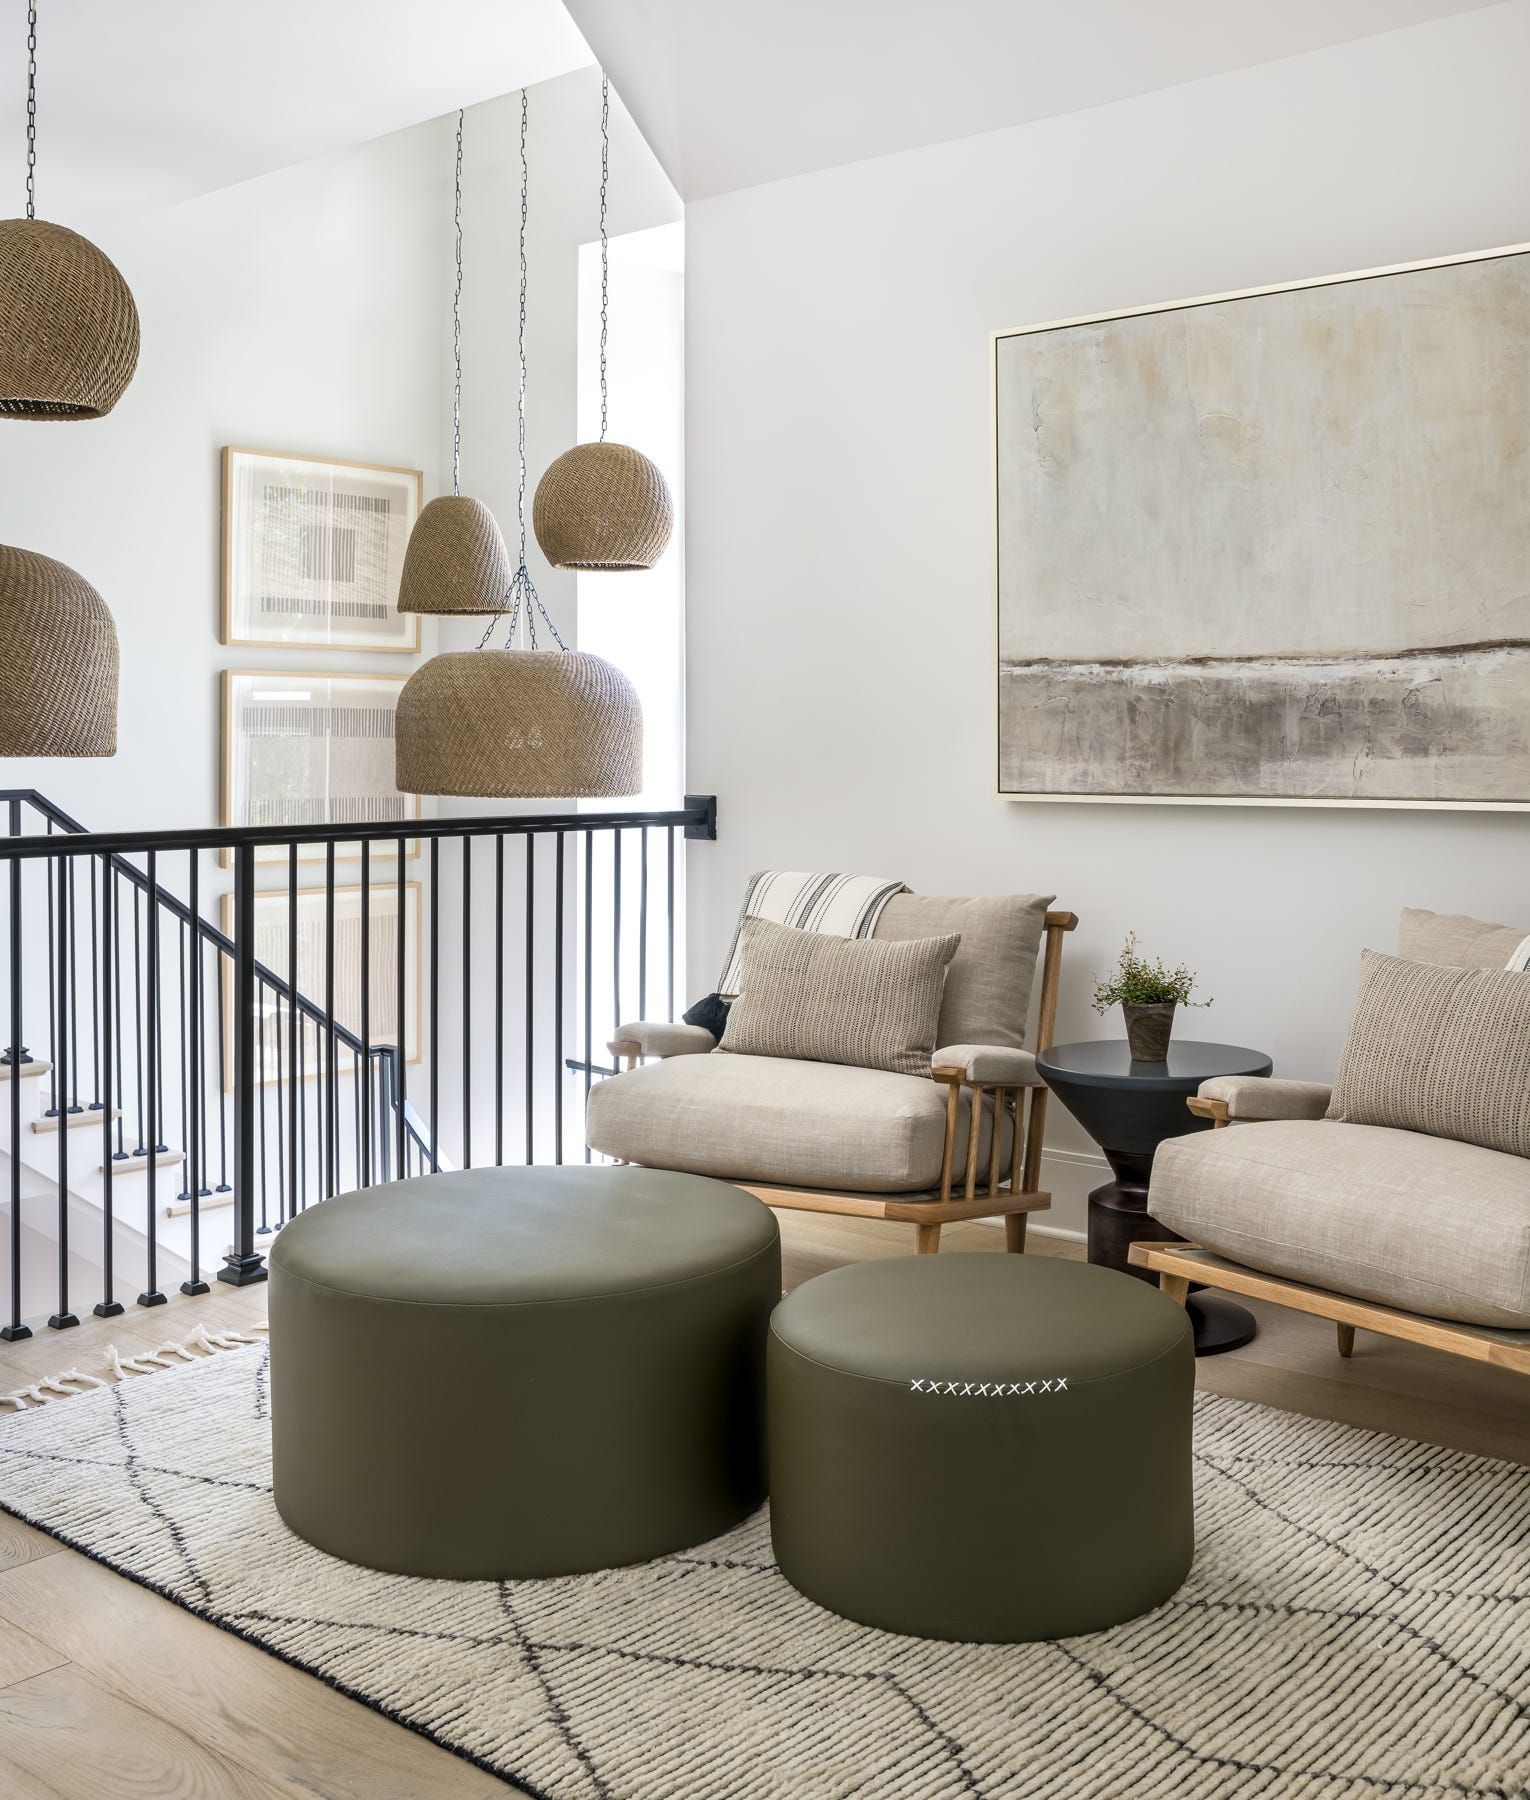 Leather Ottomans Are Everywhere Right Now—Shop Our Faves